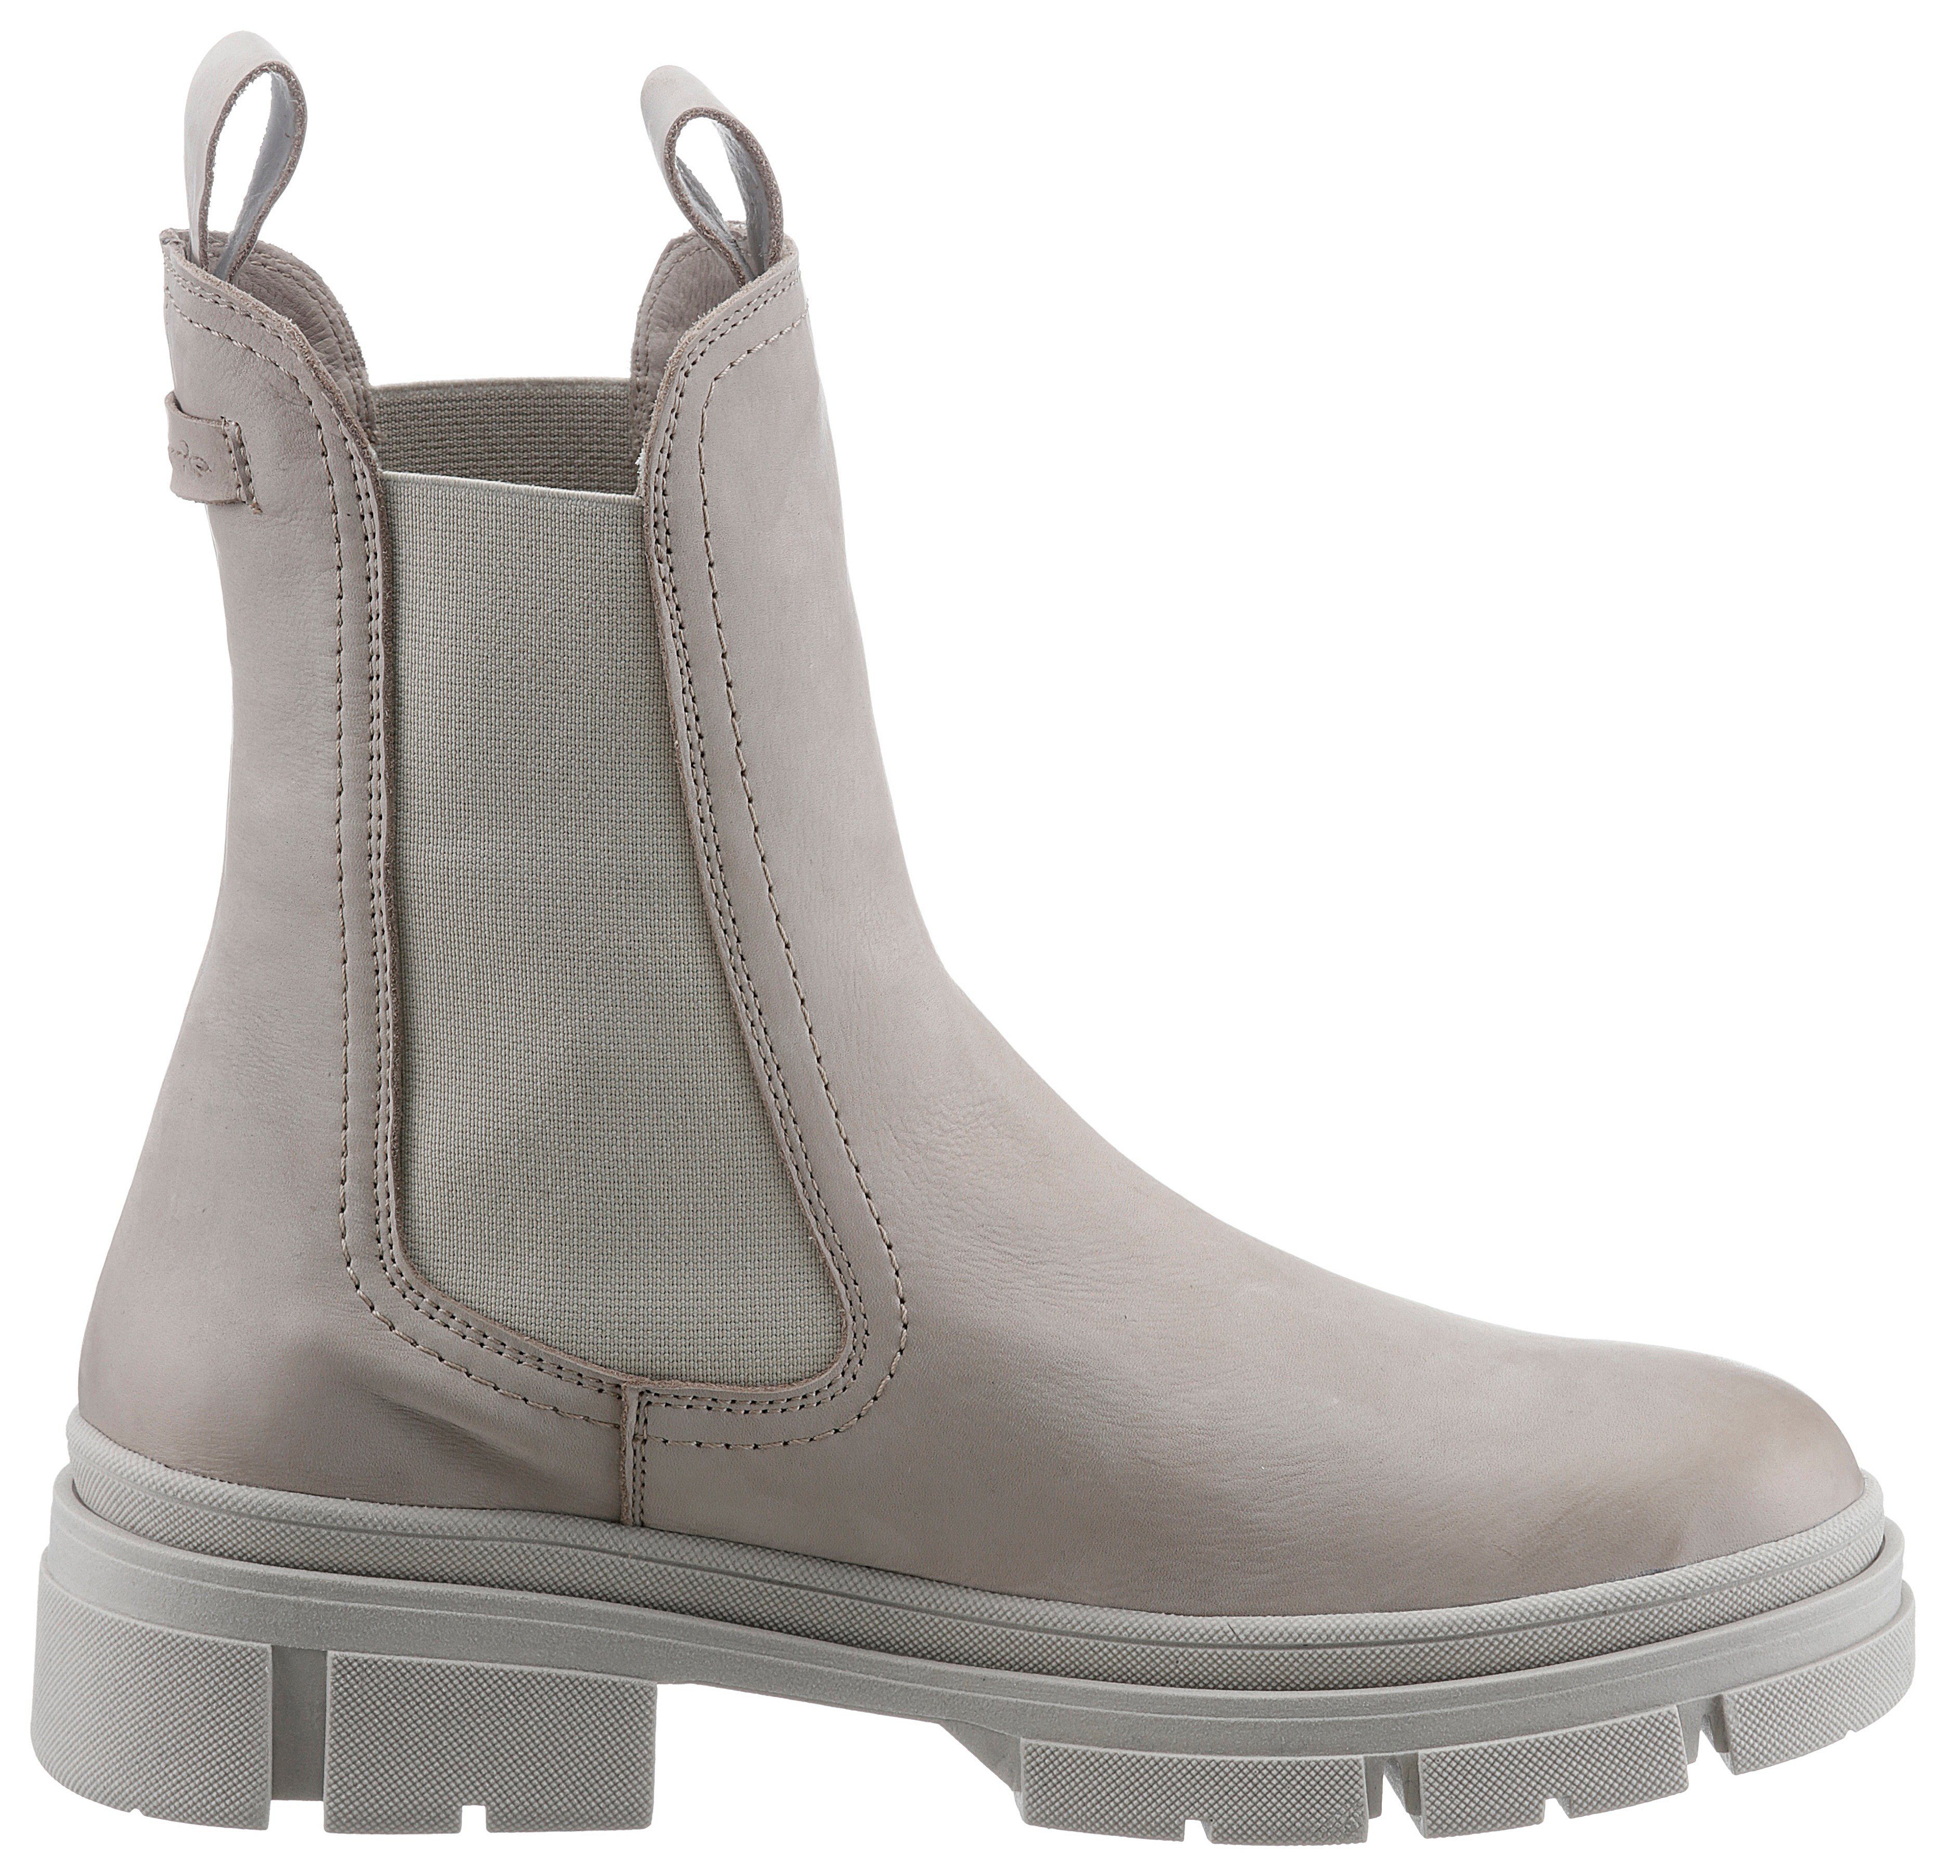 Tamaris Chelseaboots in bequemer taupe Form